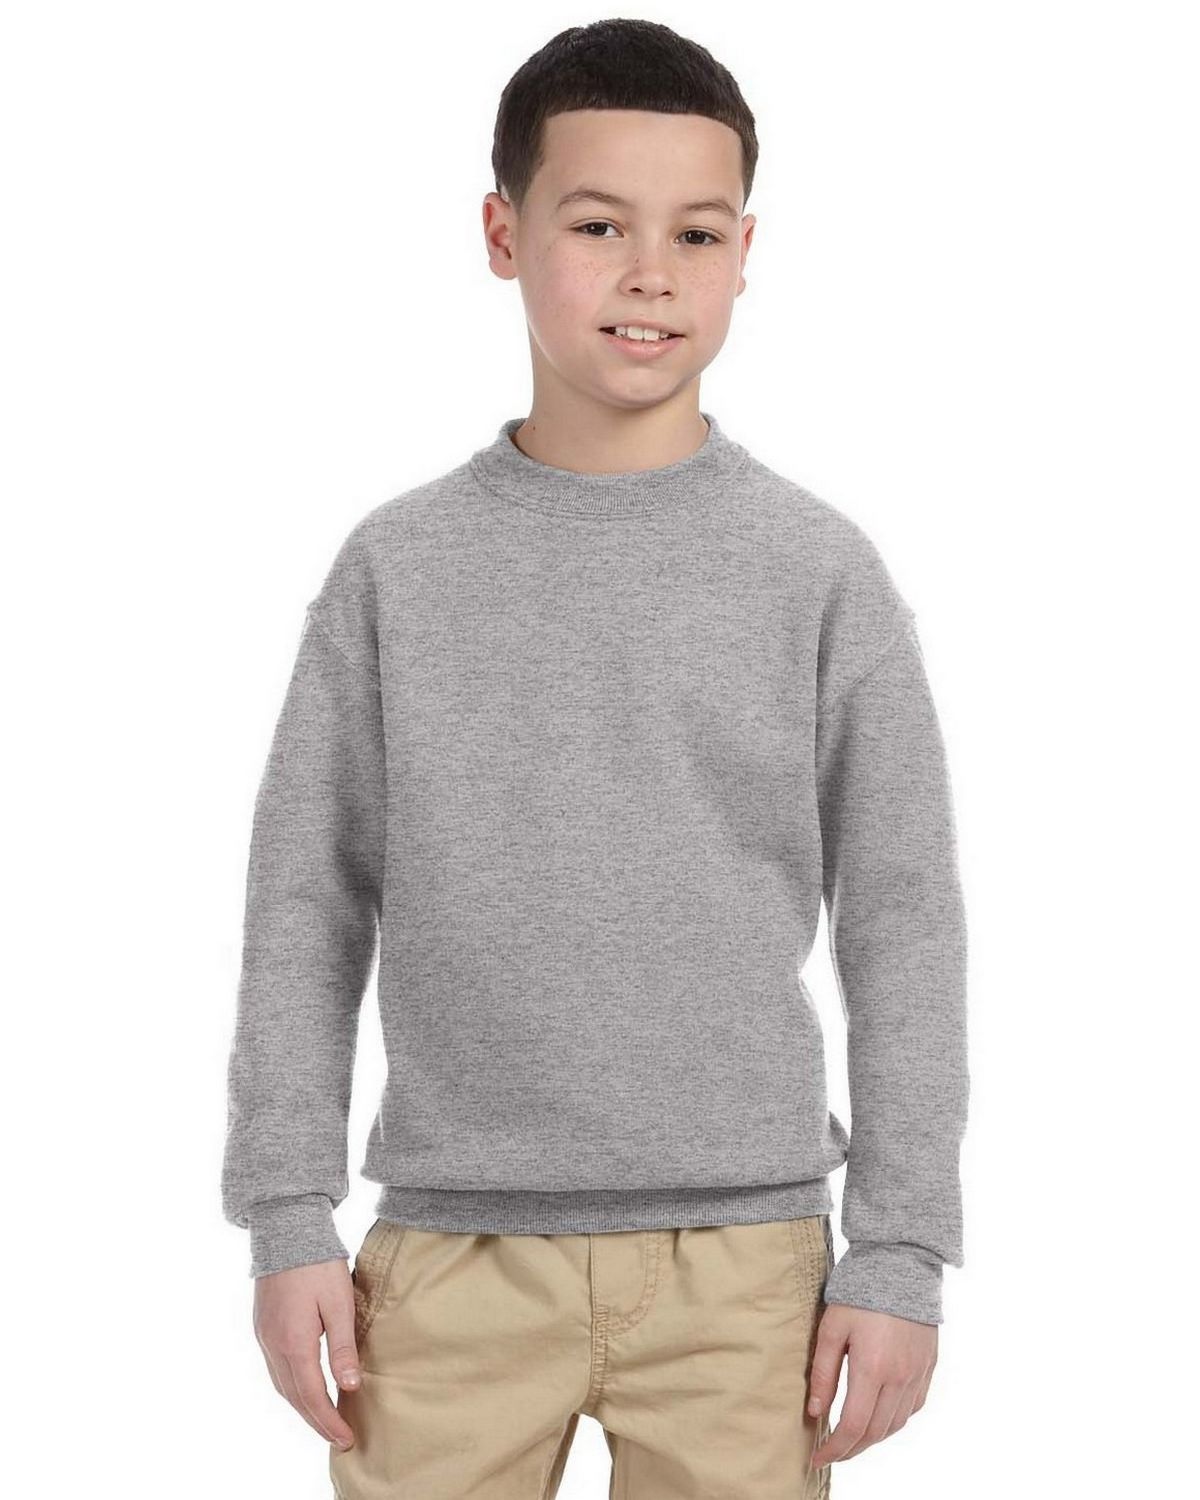 Size Chart for Jerzees 4662B Youth 9.5 oz. Super Sweats 50/50 Crew